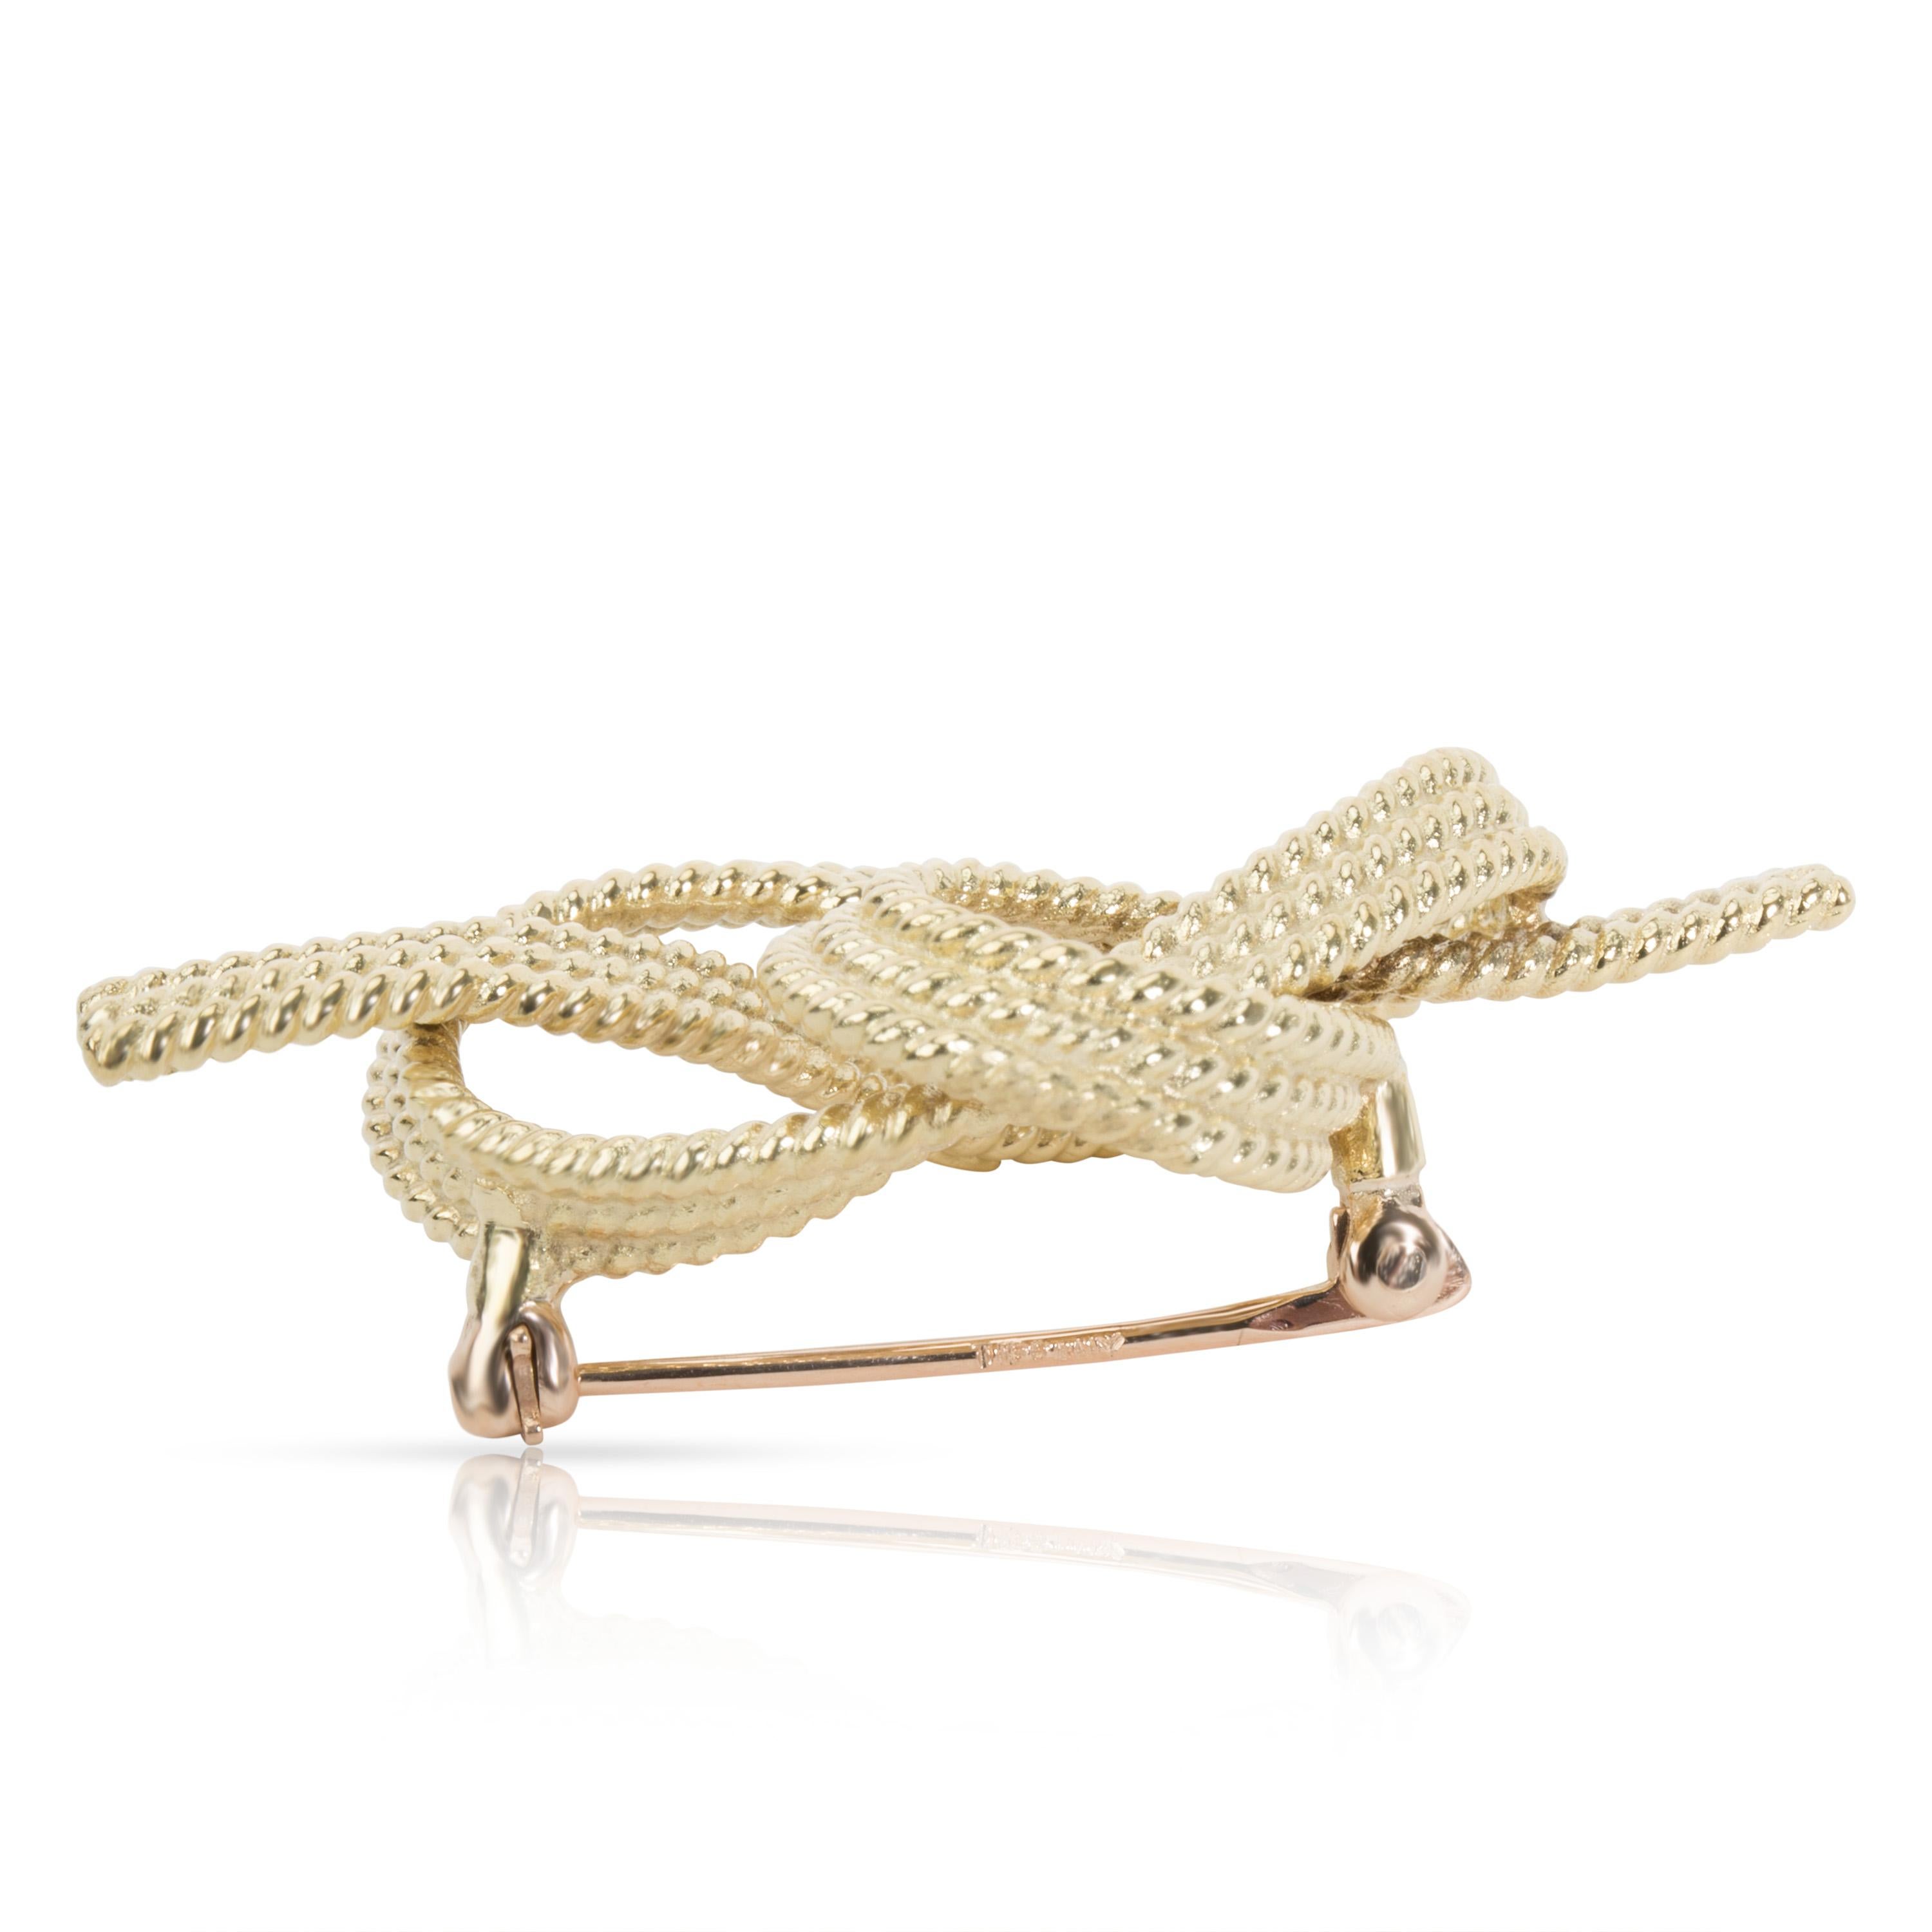 Vintage Tiffany & Co. Rope Knot Brooch in 18K Yellow Gold

PRIMARY DETAILS
SKU: 101826
Listing Title: Vintage Tiffany & Co. Rope Knot Brooch in 18K Yellow Gold
Condition Description: Retails for 2400 USD. In excellent condition and recently